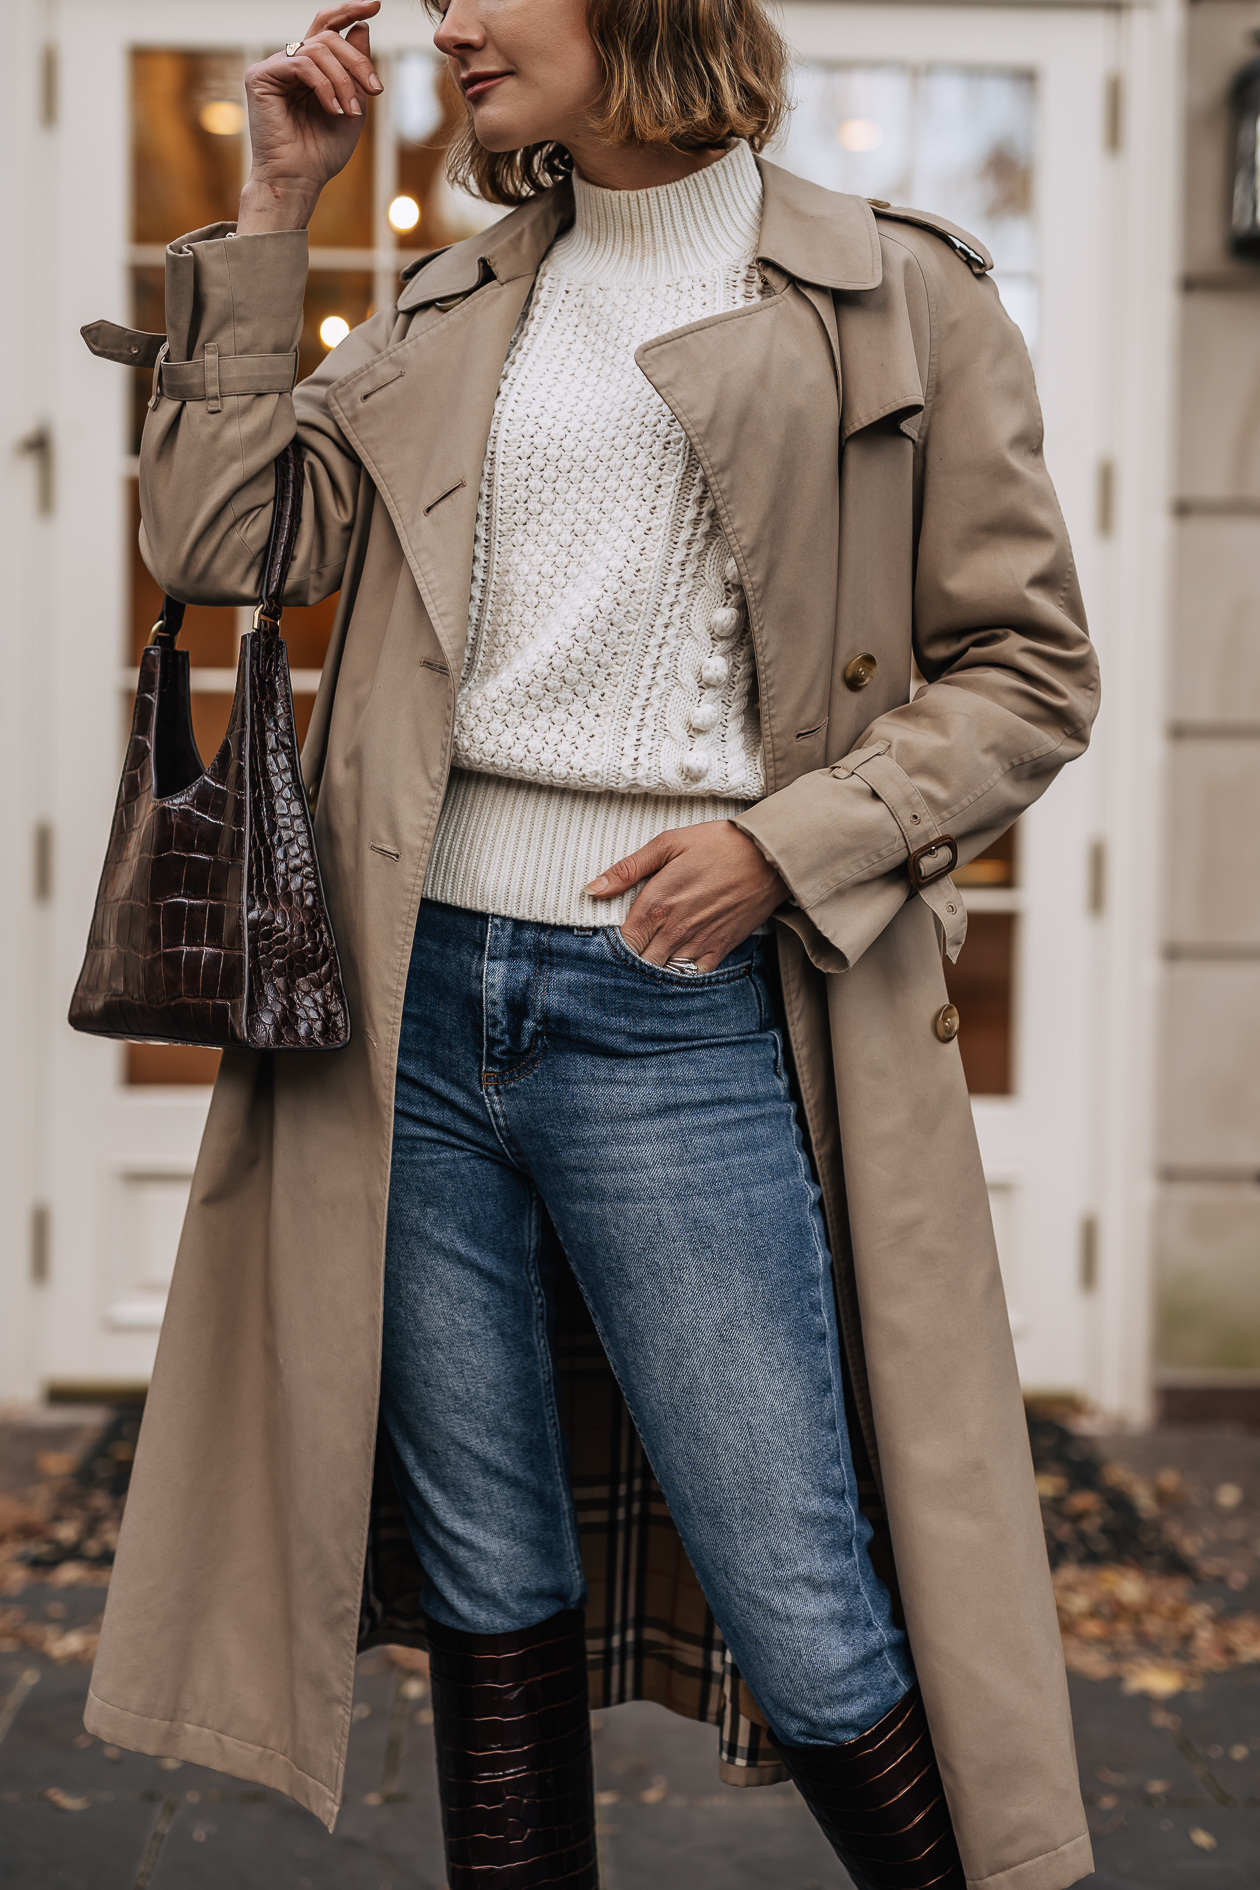 classic trench coat & knee high boots outfit